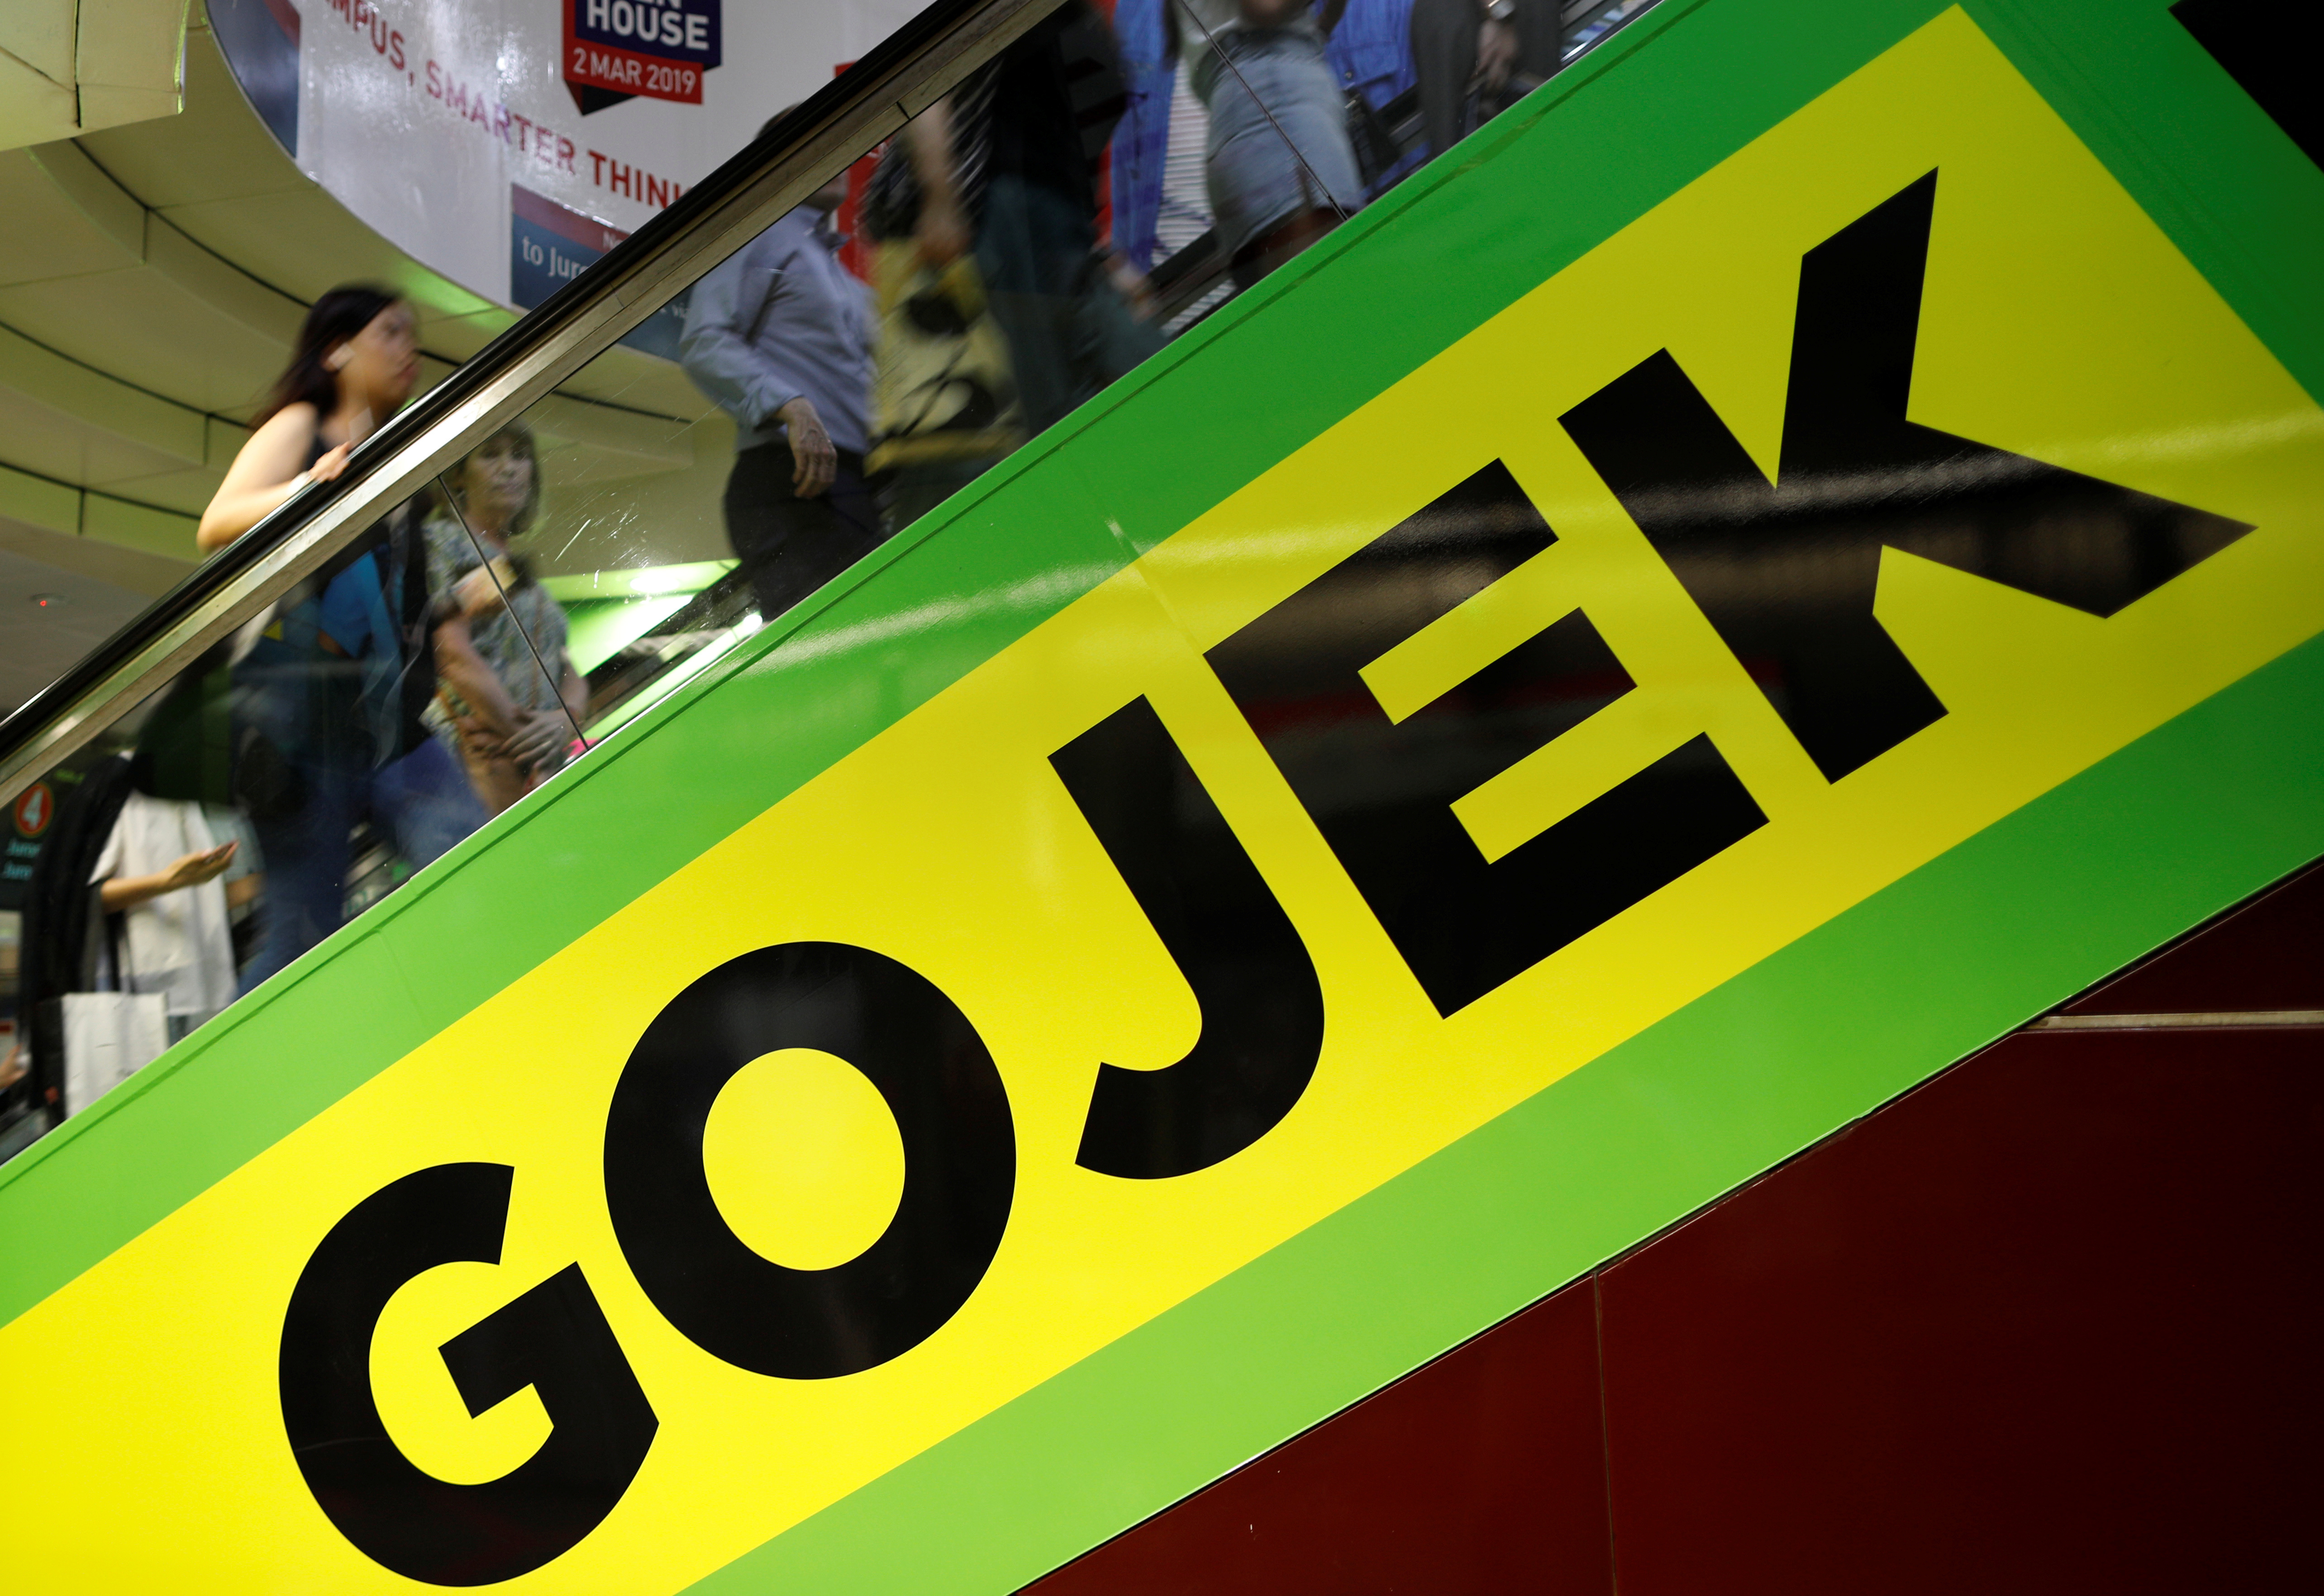 Commuters pass by a Gojek advertisement in Singapore